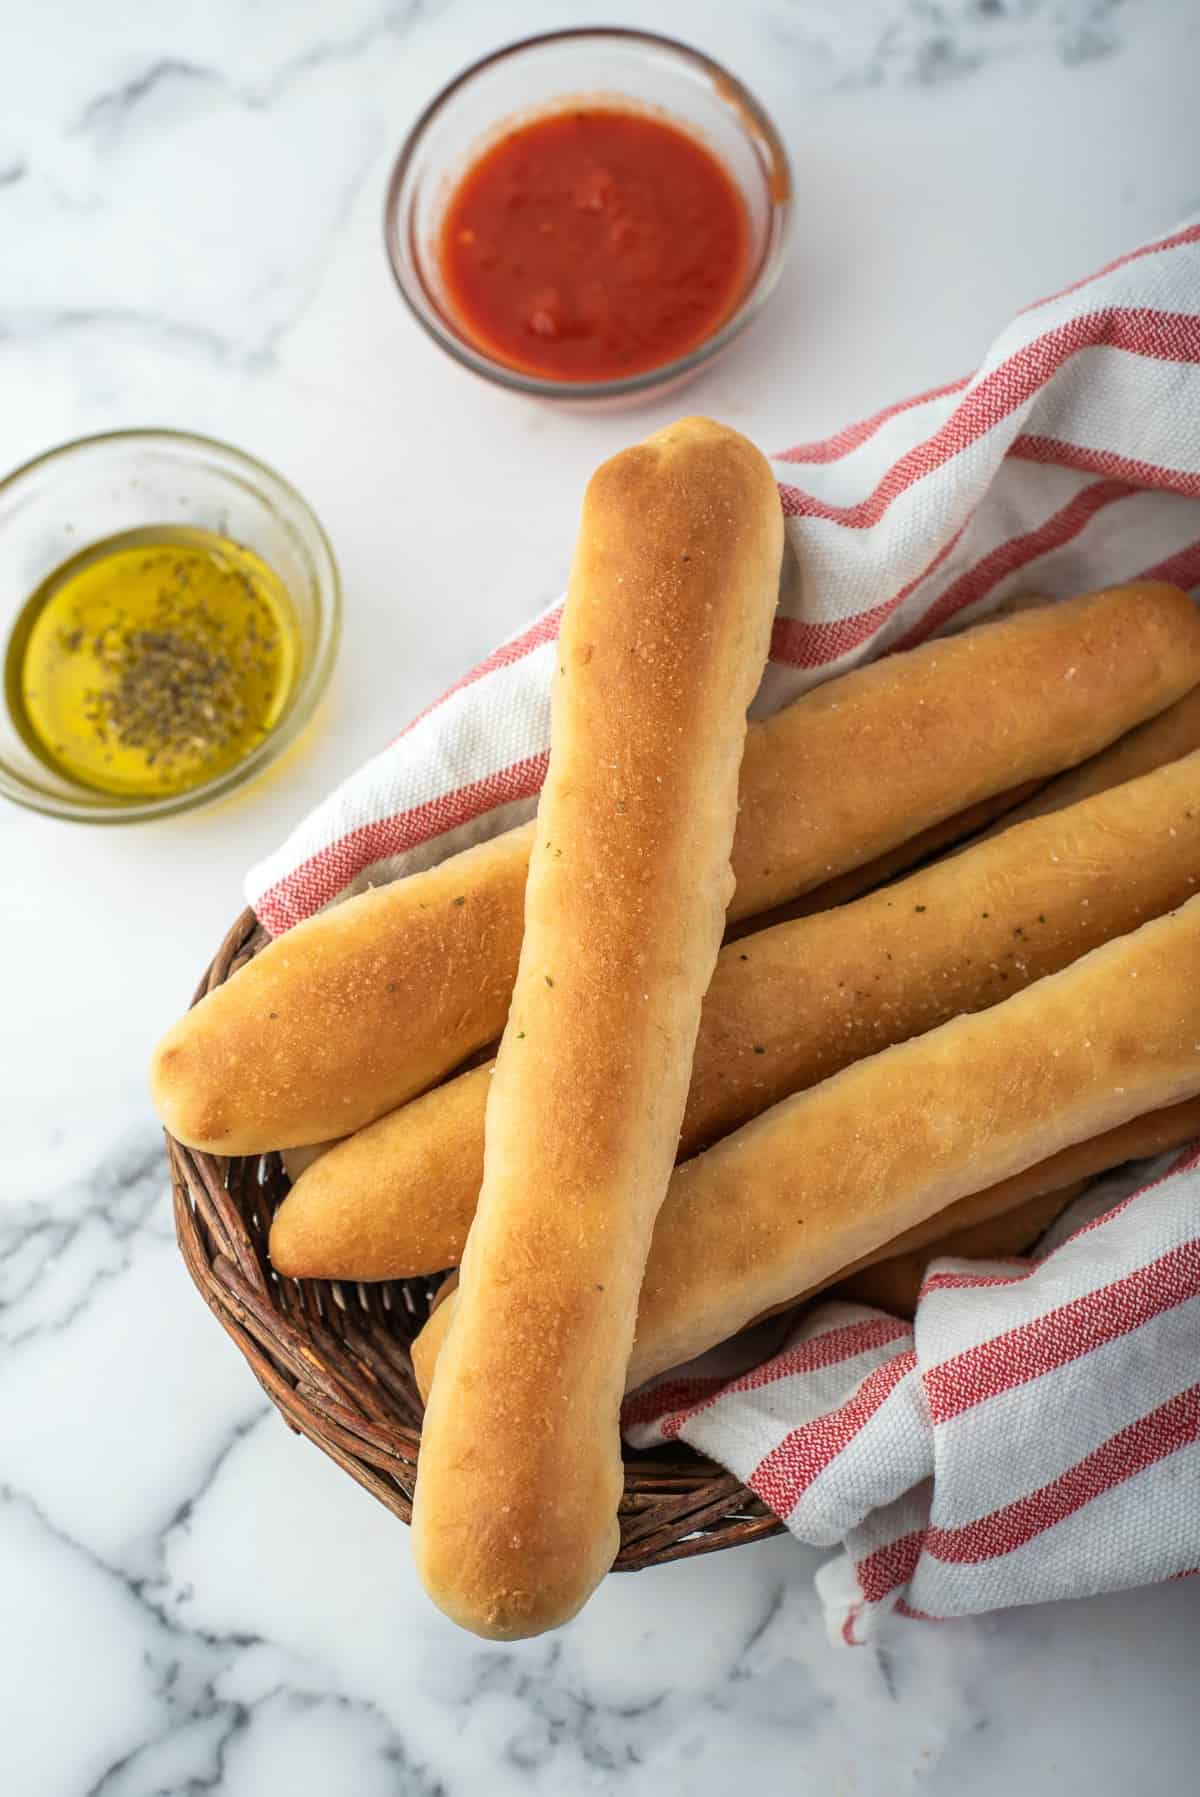 Breadsticks in a wooden bowl with dipping bowls of marinara and oil on the side.